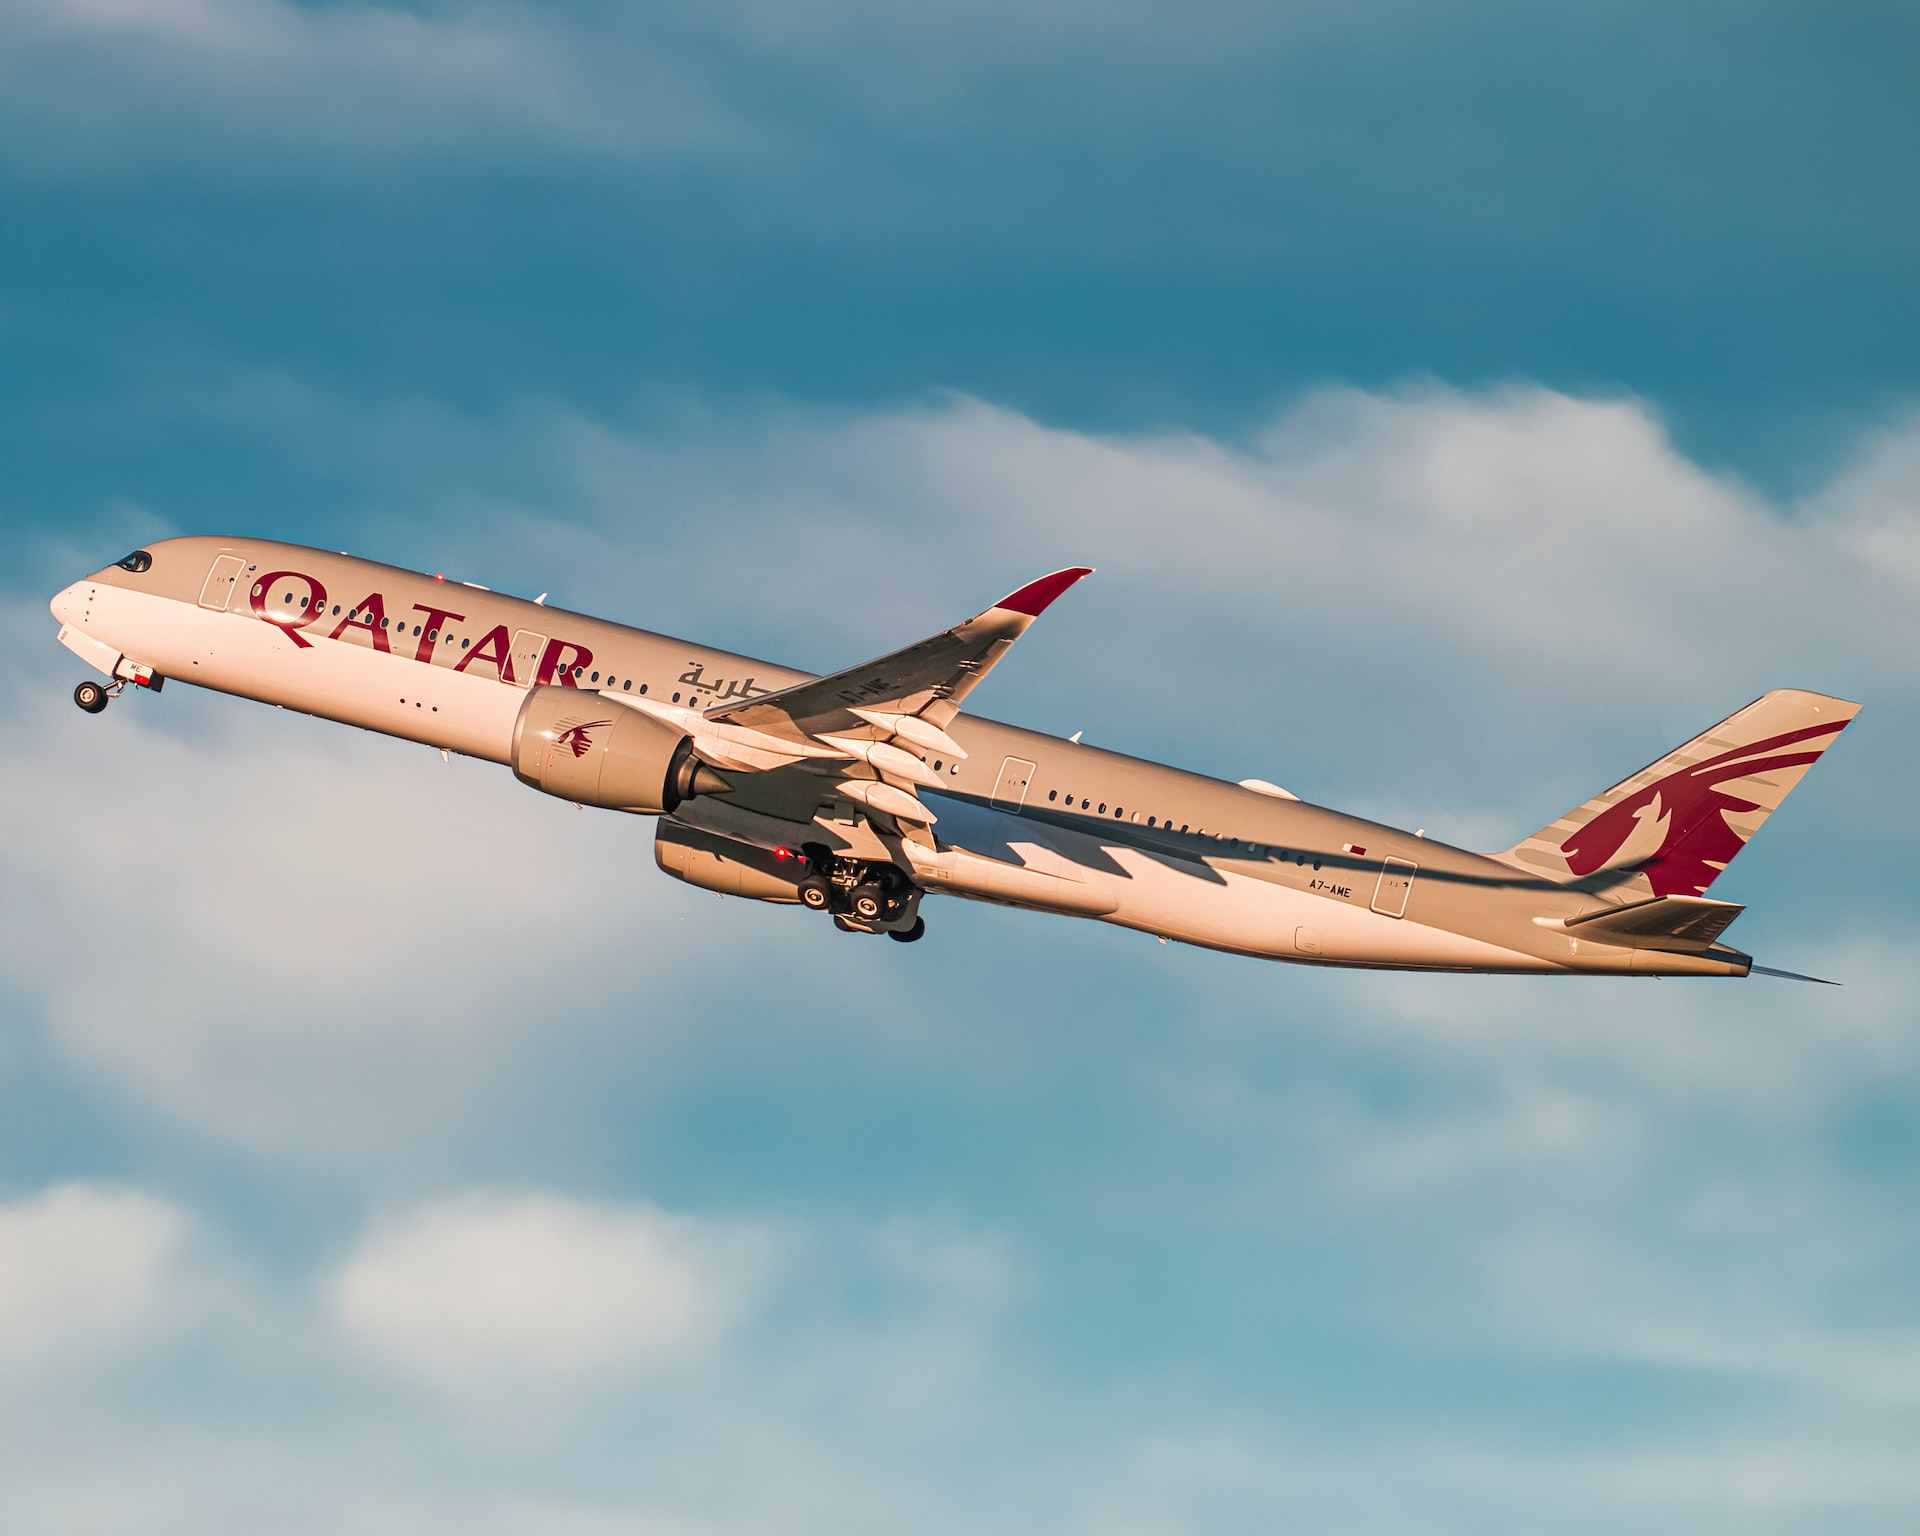 Qatar Airways airplane lively with airline branding: oryx on the tail and engines of an aircraft.